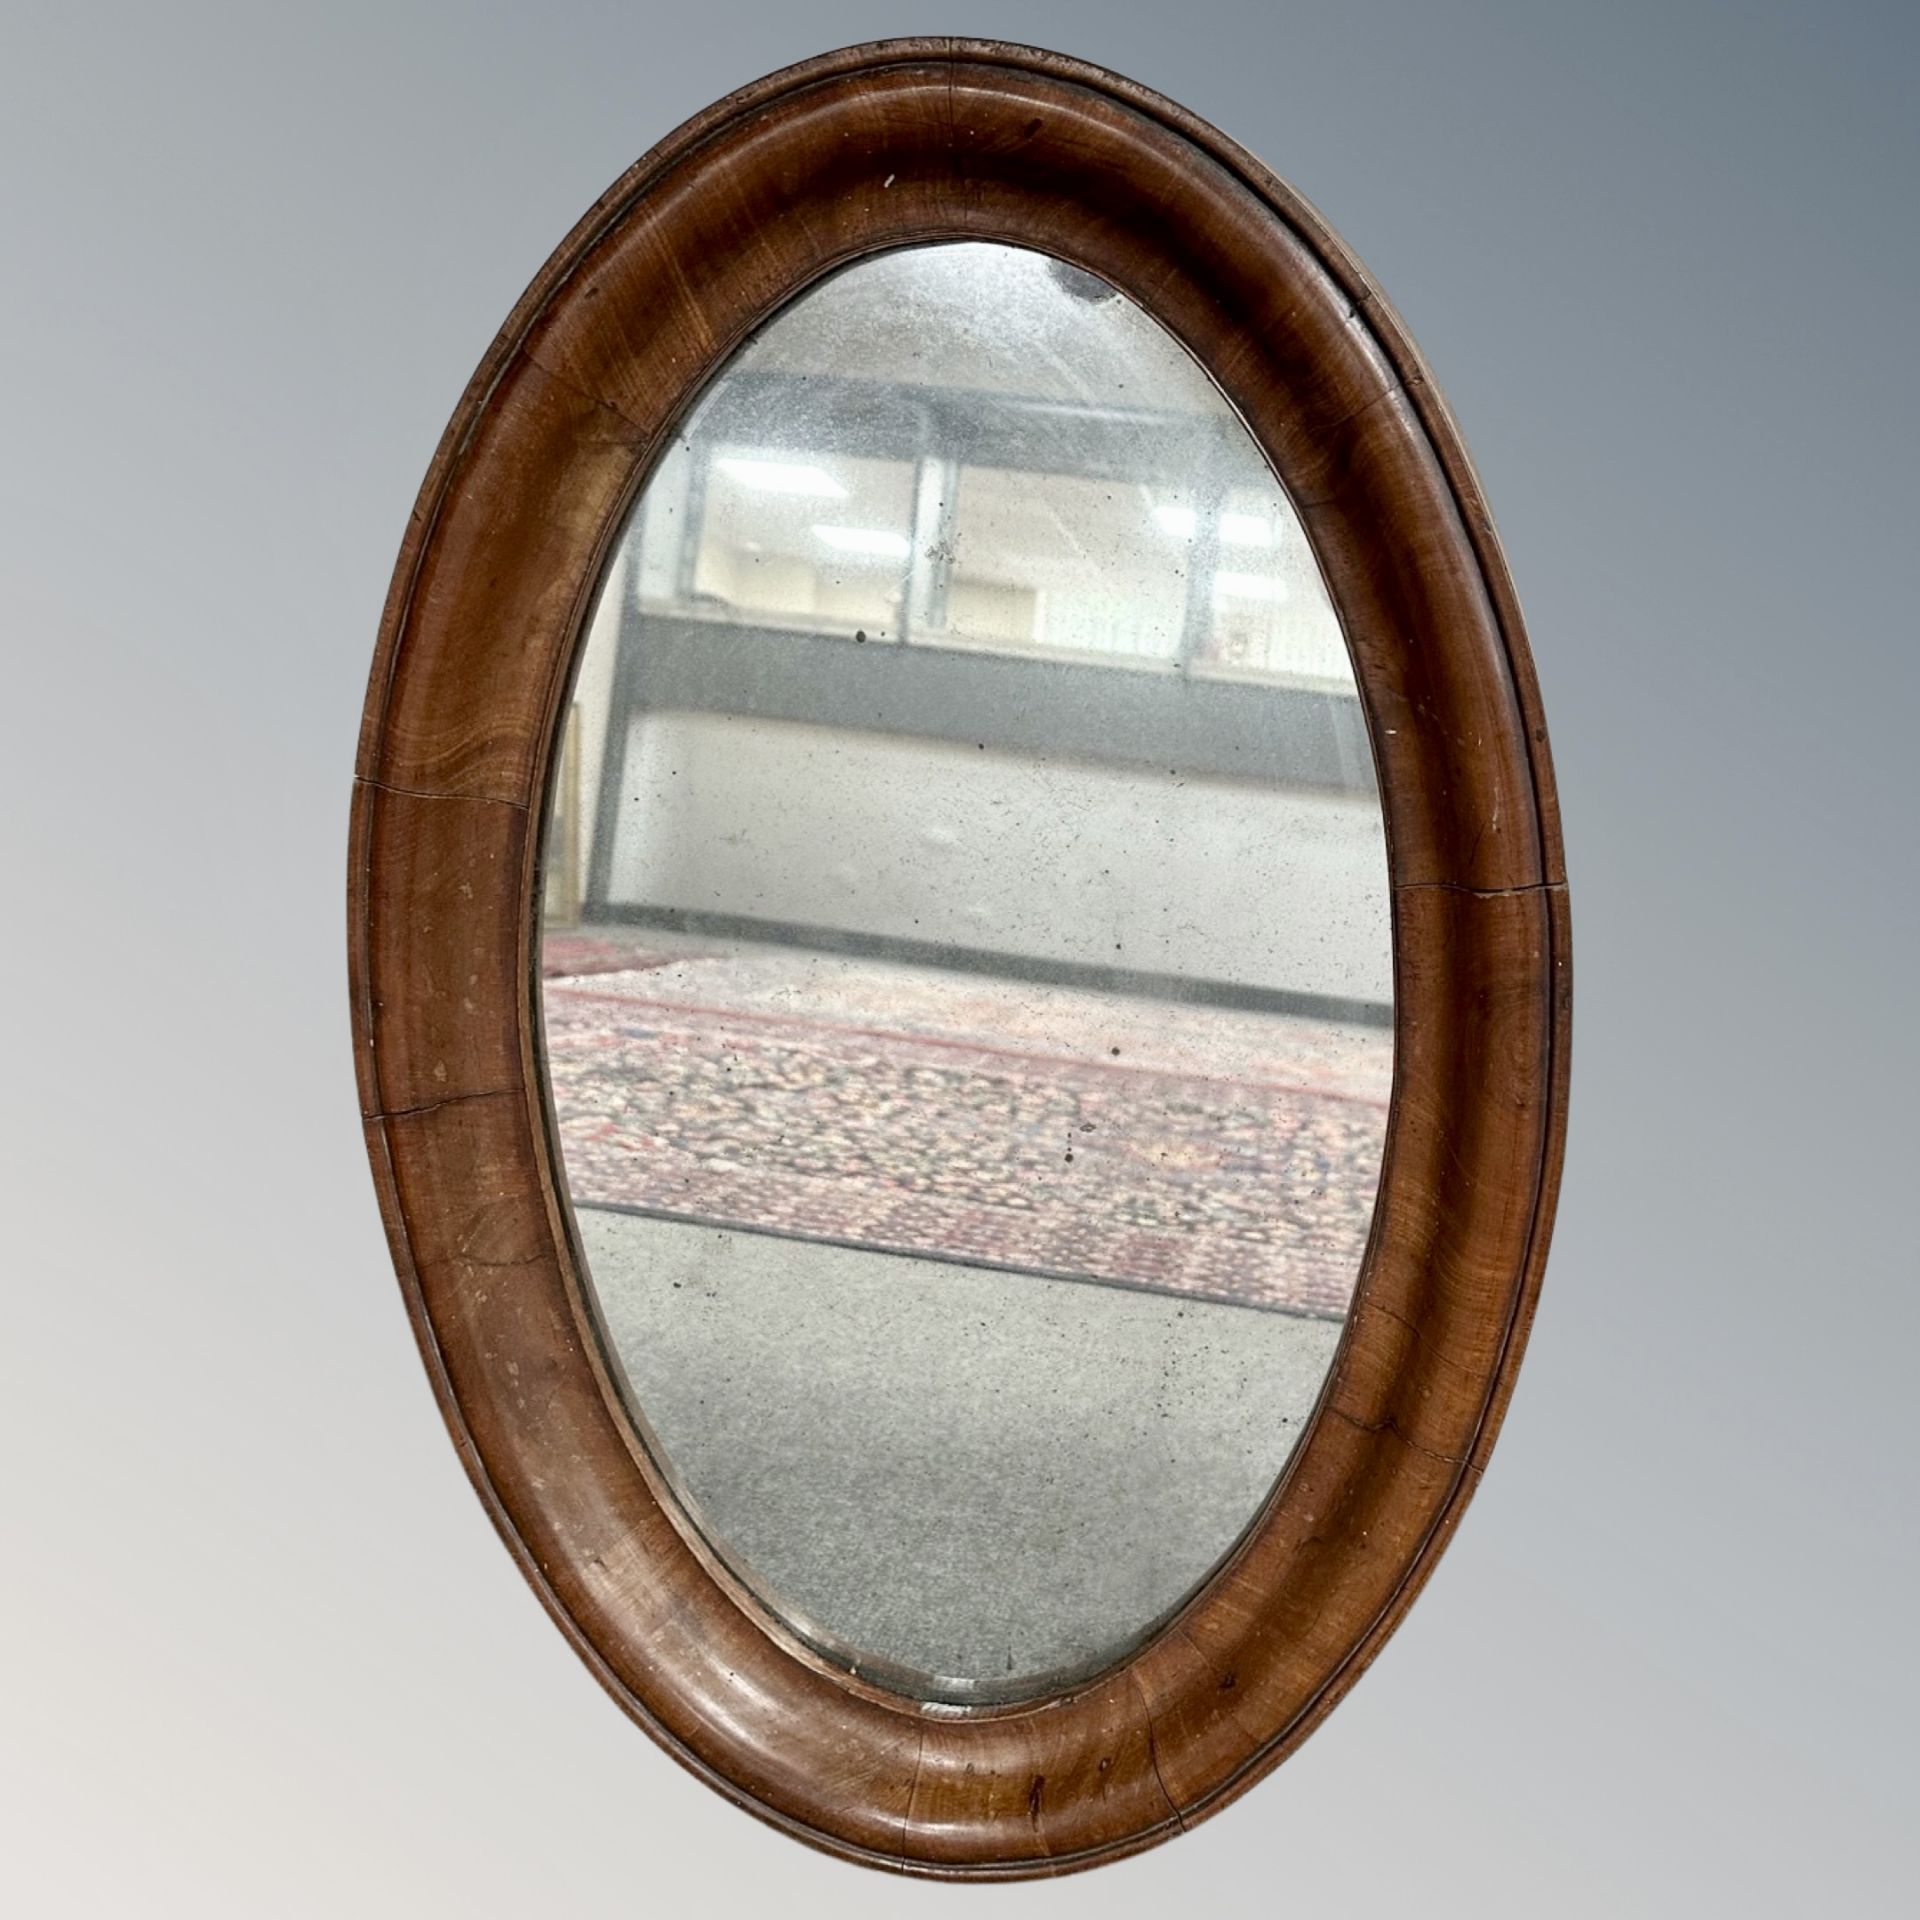 Two 19th century mahogany mirrors (oval mirror 48cm by 74cm,